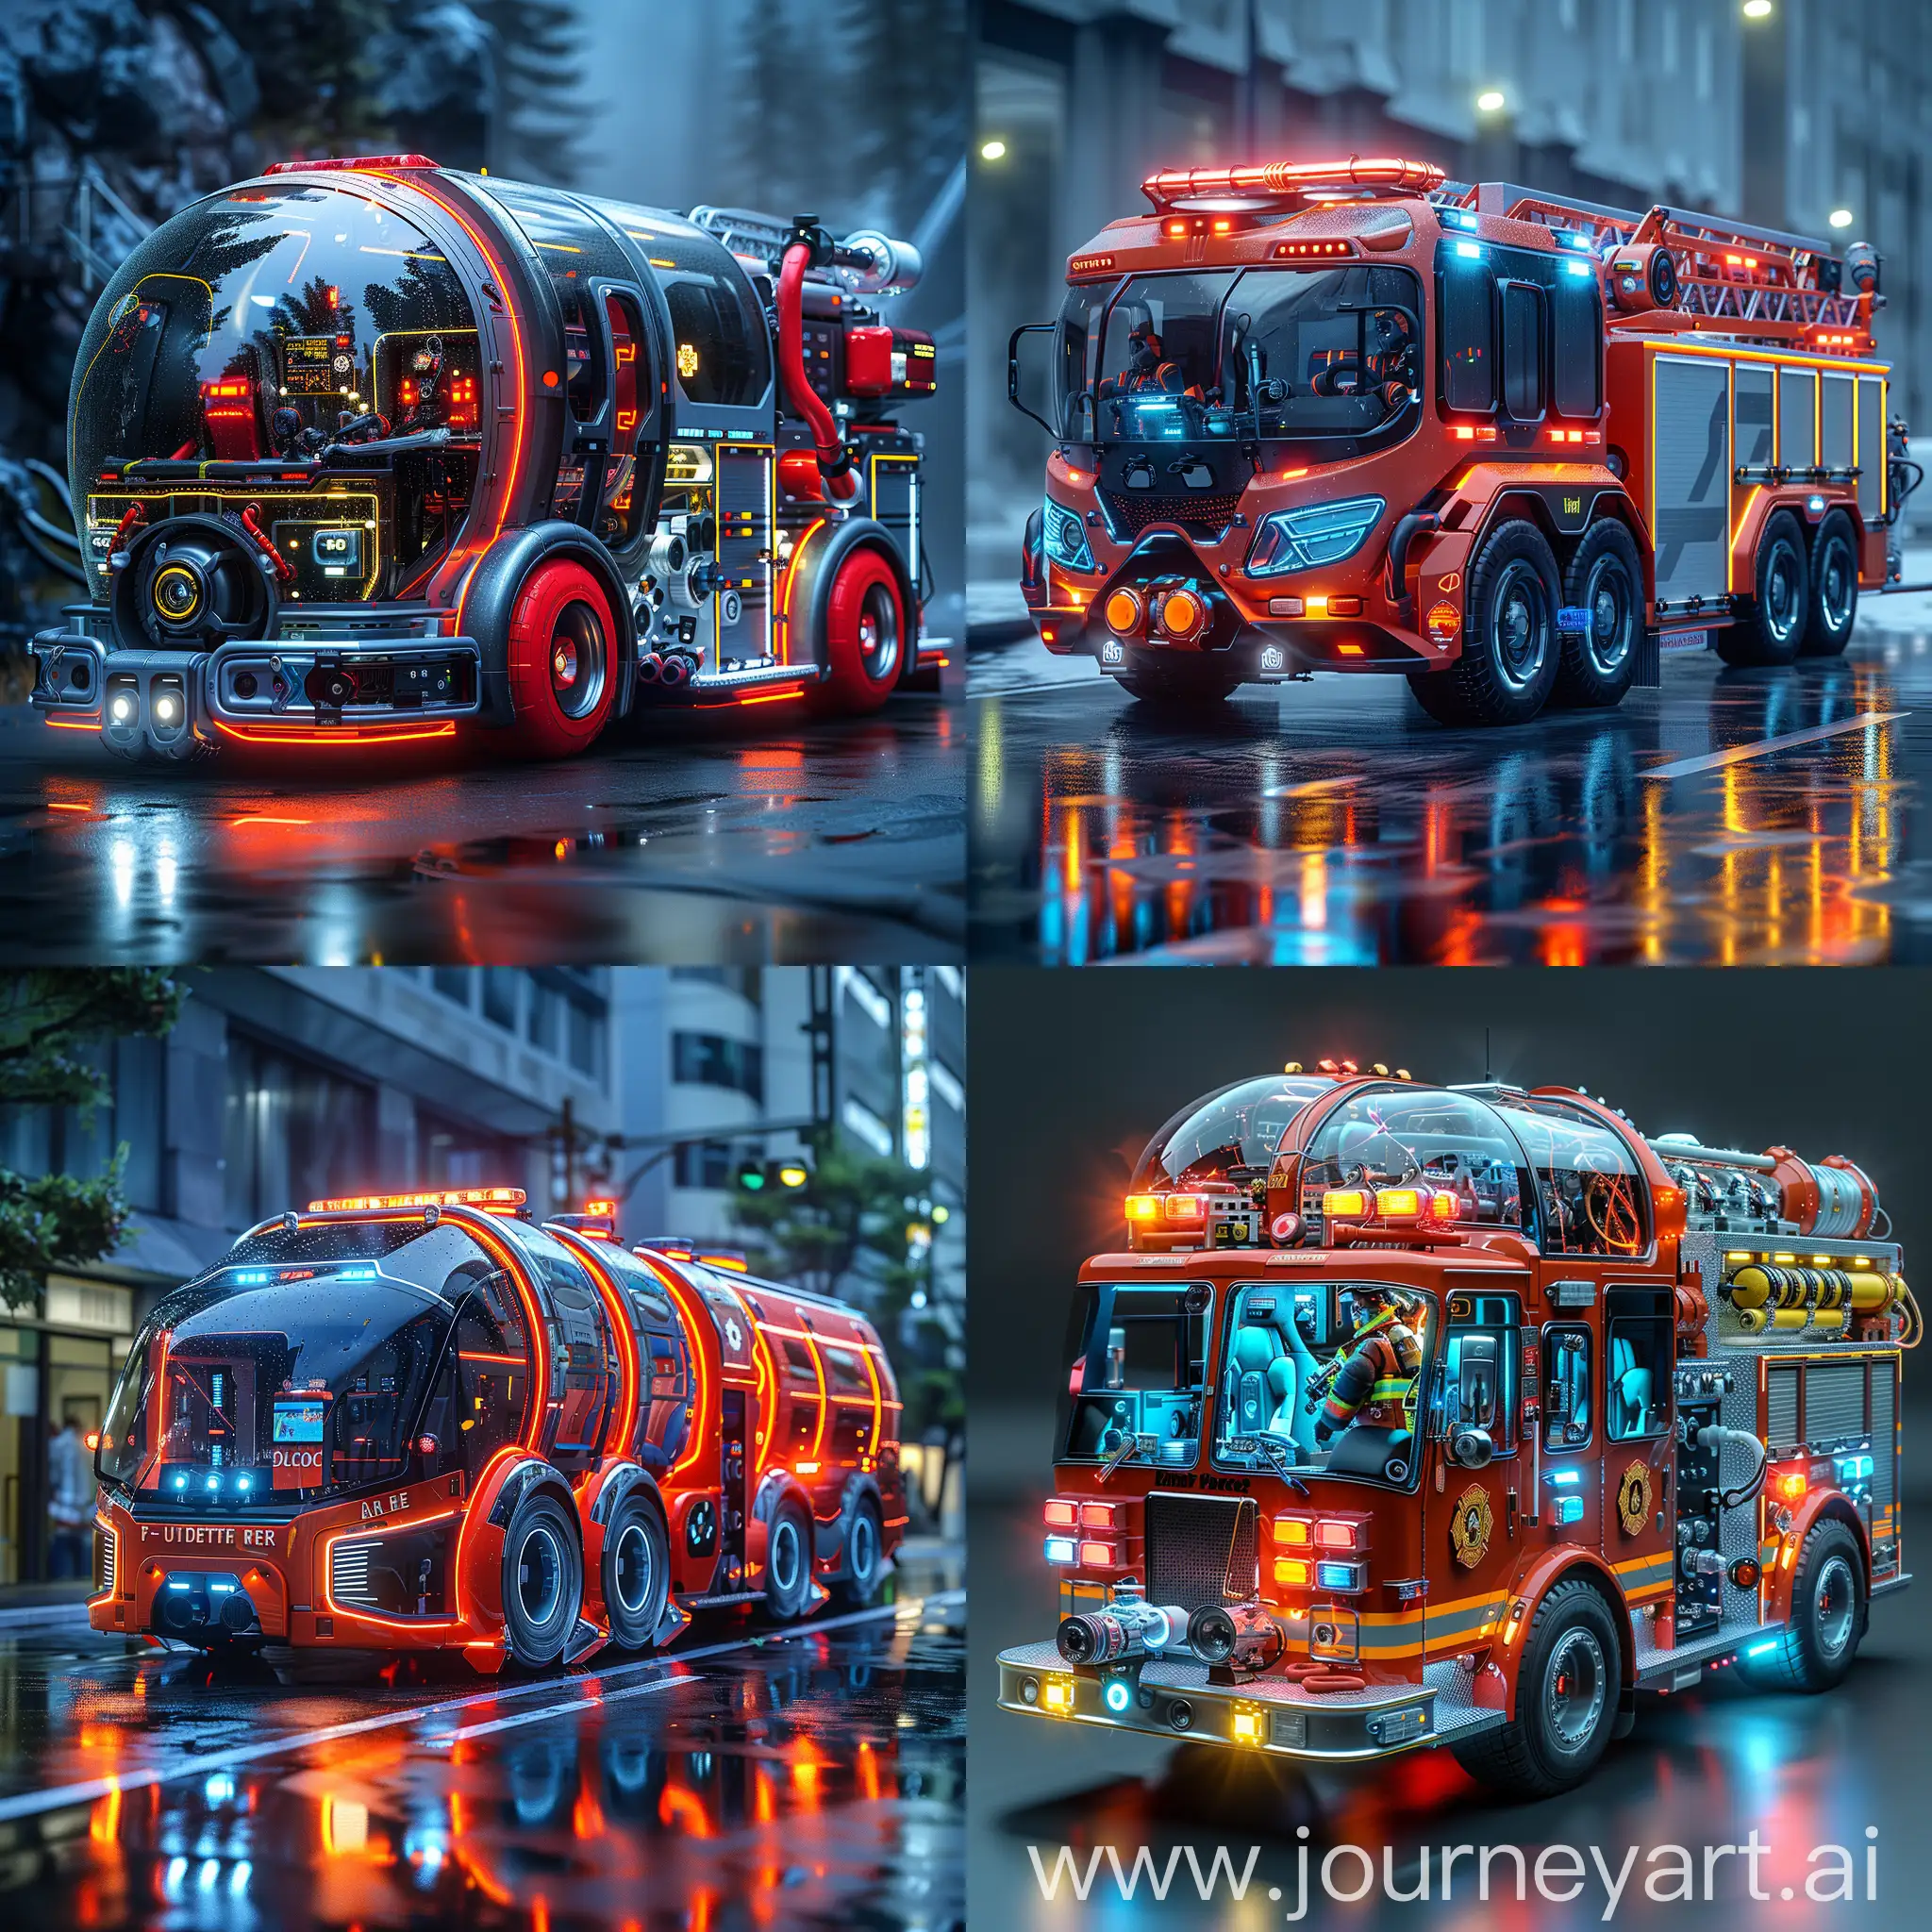 Futuristic-Fire-Truck-with-Advanced-Autonomous-Features-and-Green-Technology